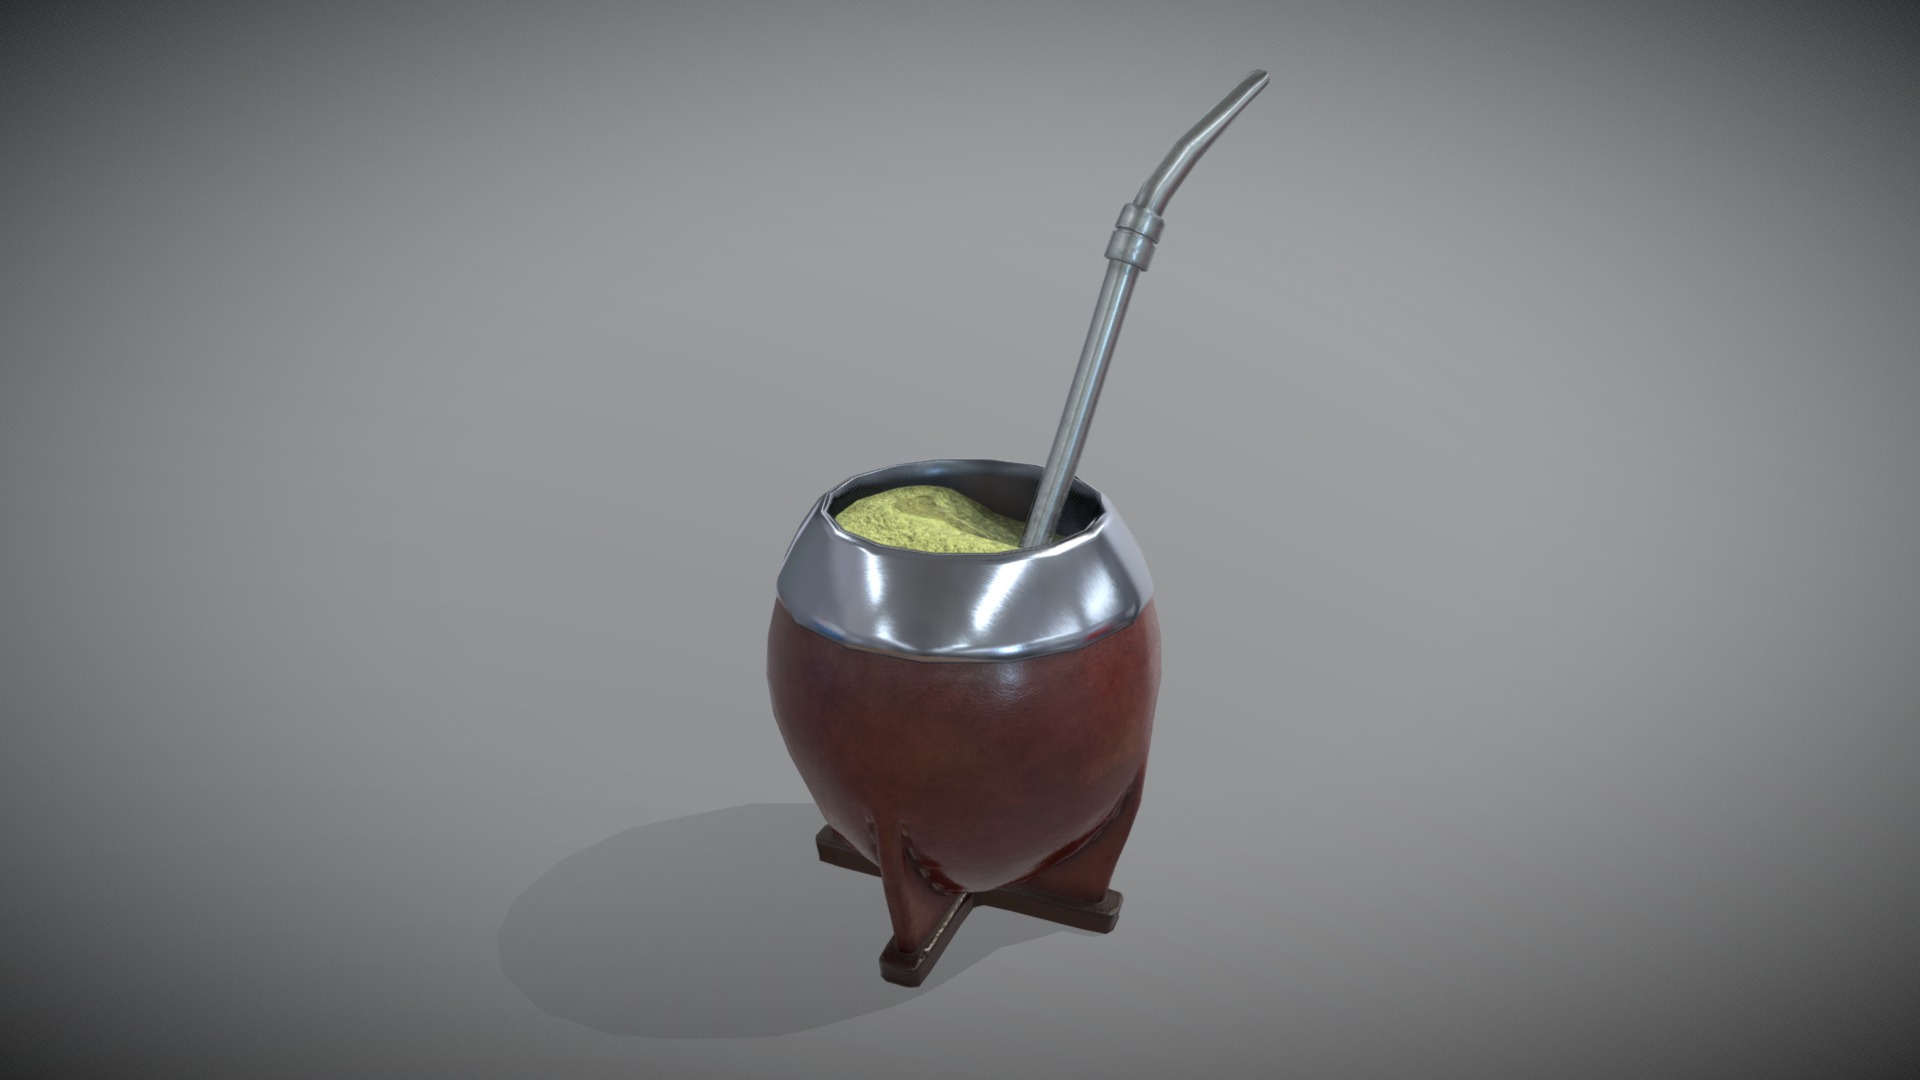 3D model Mate Uruguayo. - This is a 3D model of the Mate Uruguayo.. The 3D model is about a metal cup with a spoon.